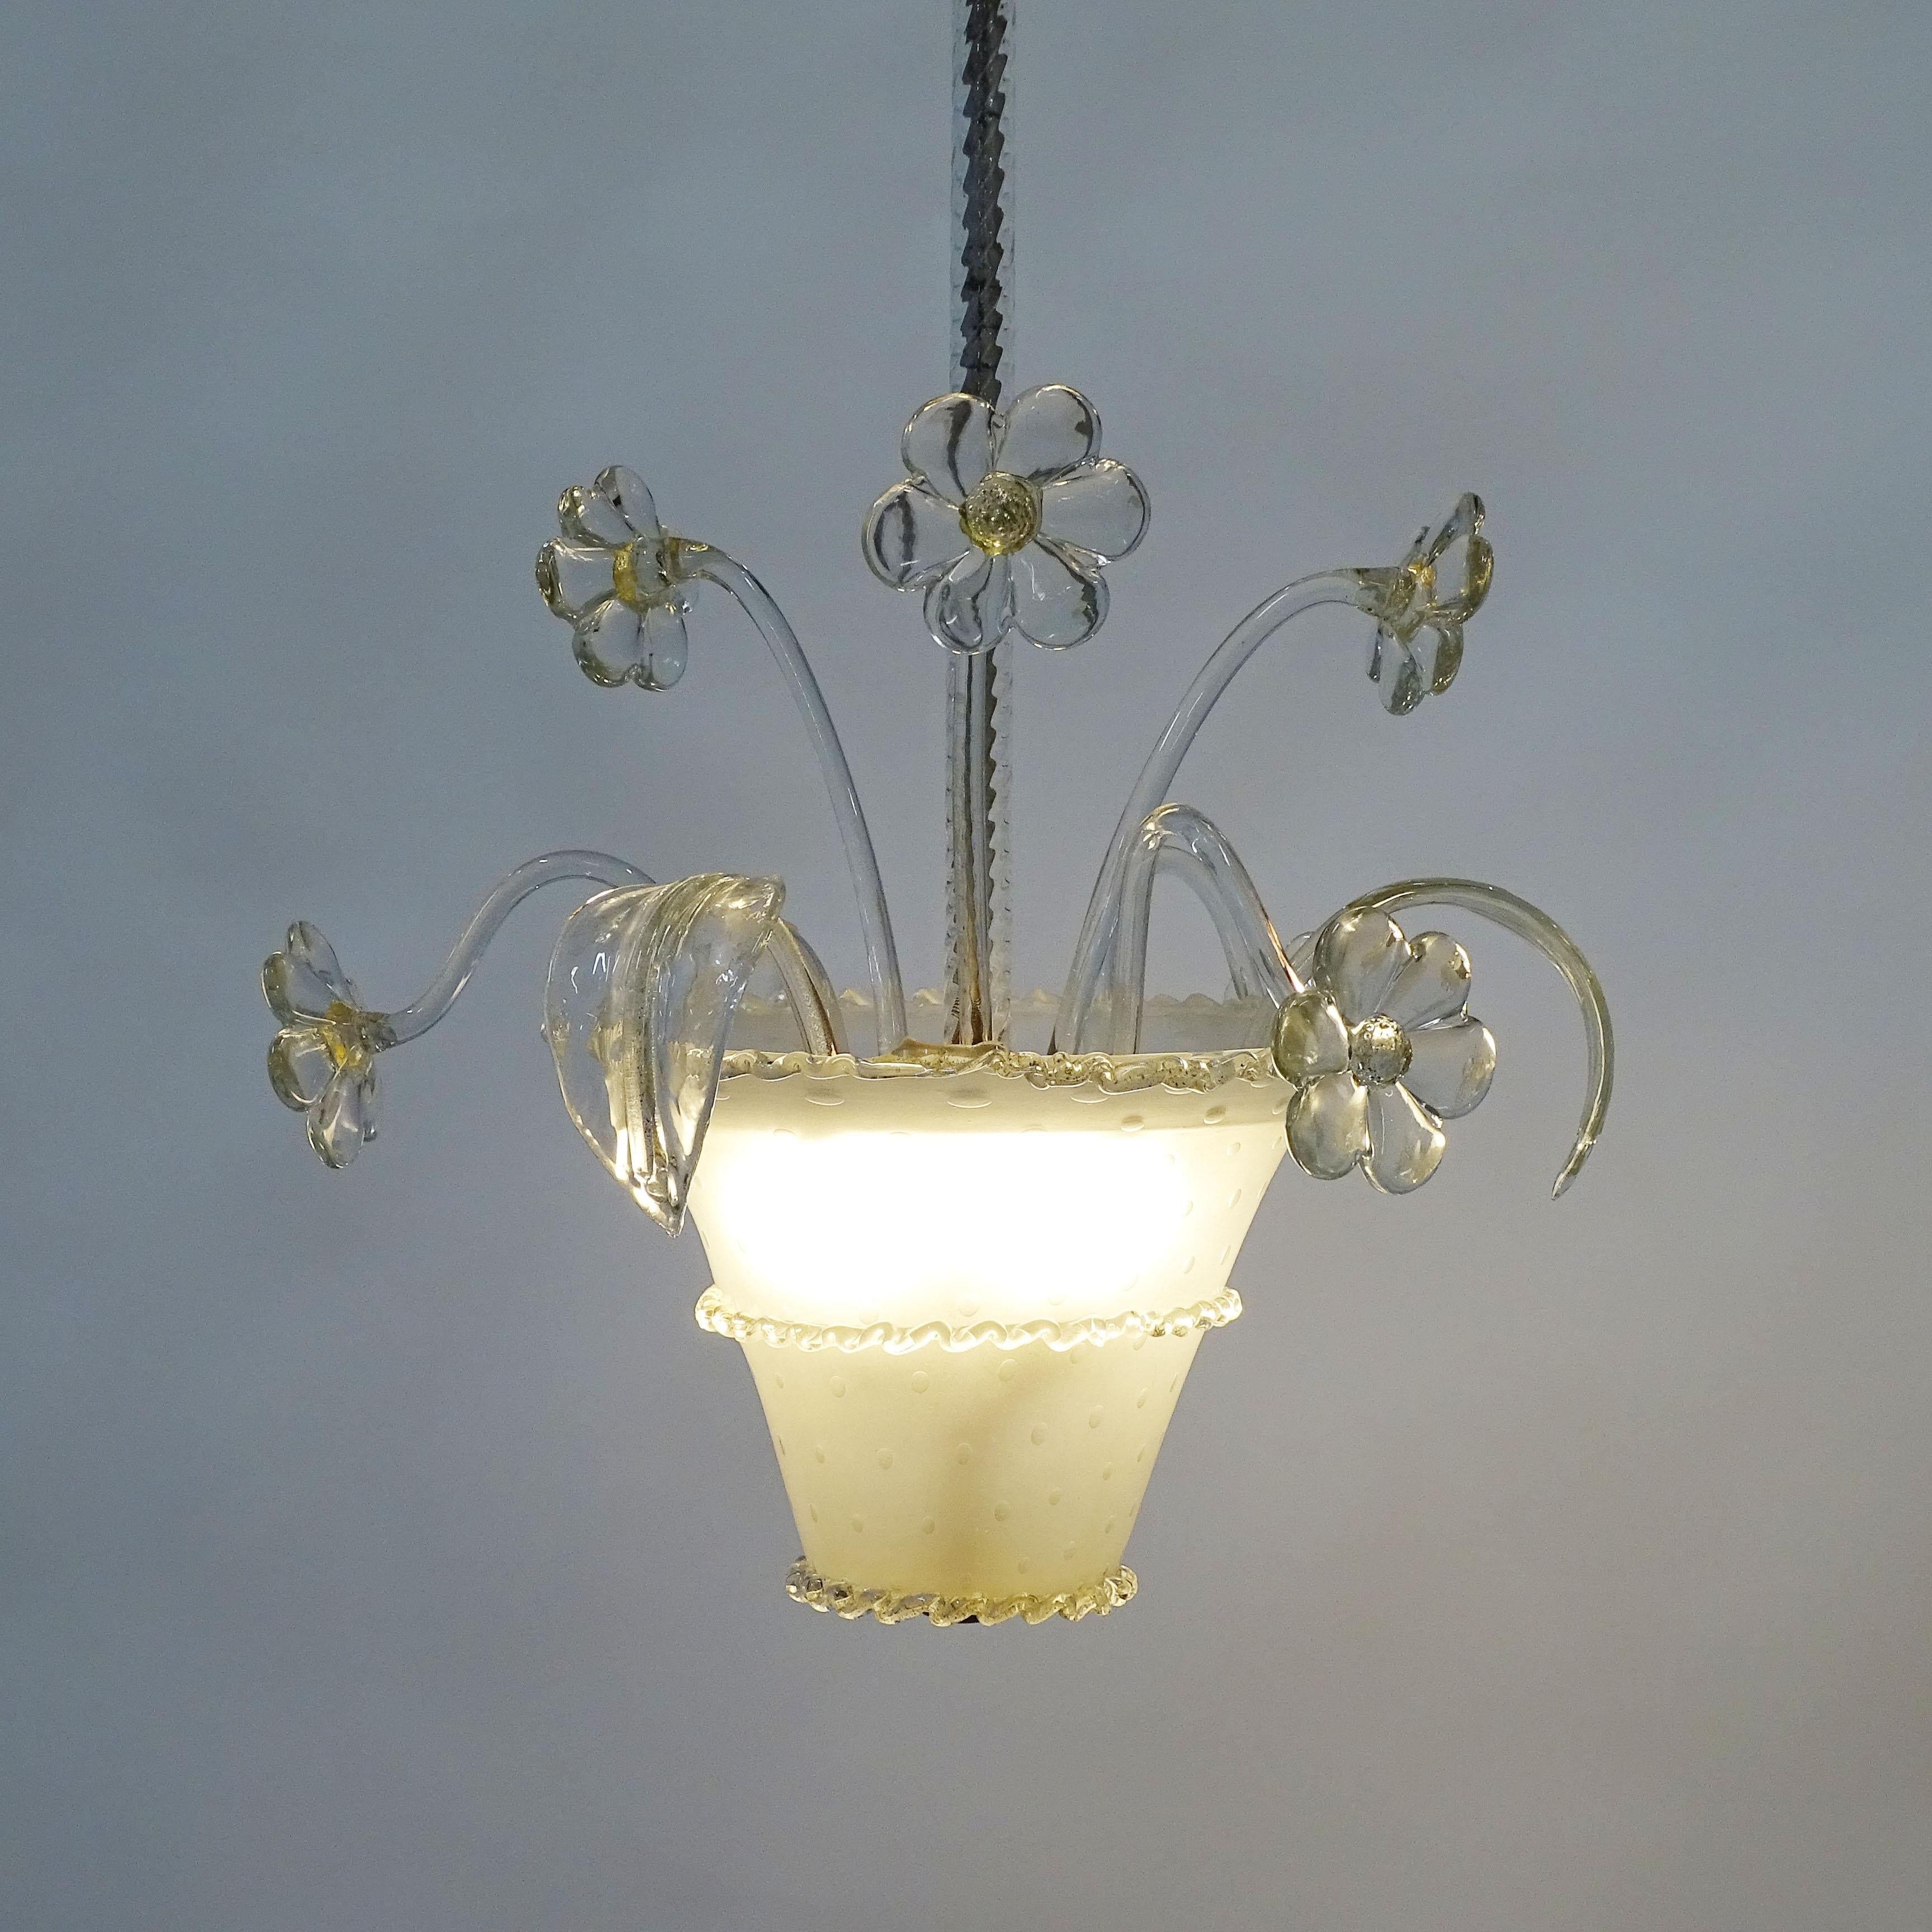 Sublime Barovier 1940s Murano glass flower pot ceiling lamp.
Bolle, crinoline, and transparent Murano glass with gold leaf inclusions as highlights.
Every gardener dreams of a ceiling lamp.
An absolute Beauty!
Carries three bulbs